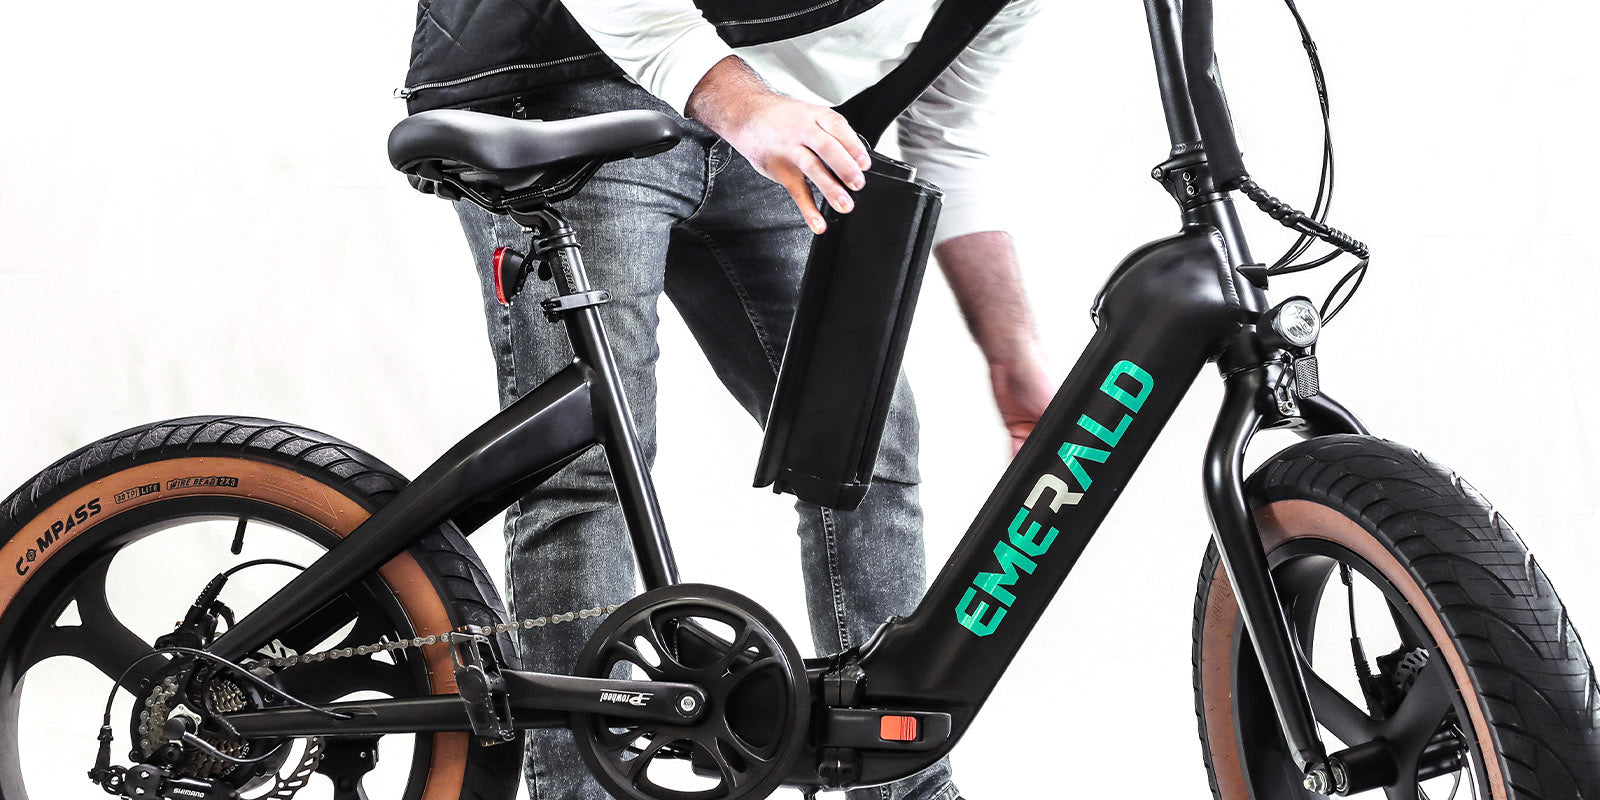 Showing off the Emerald ebike's removable battery